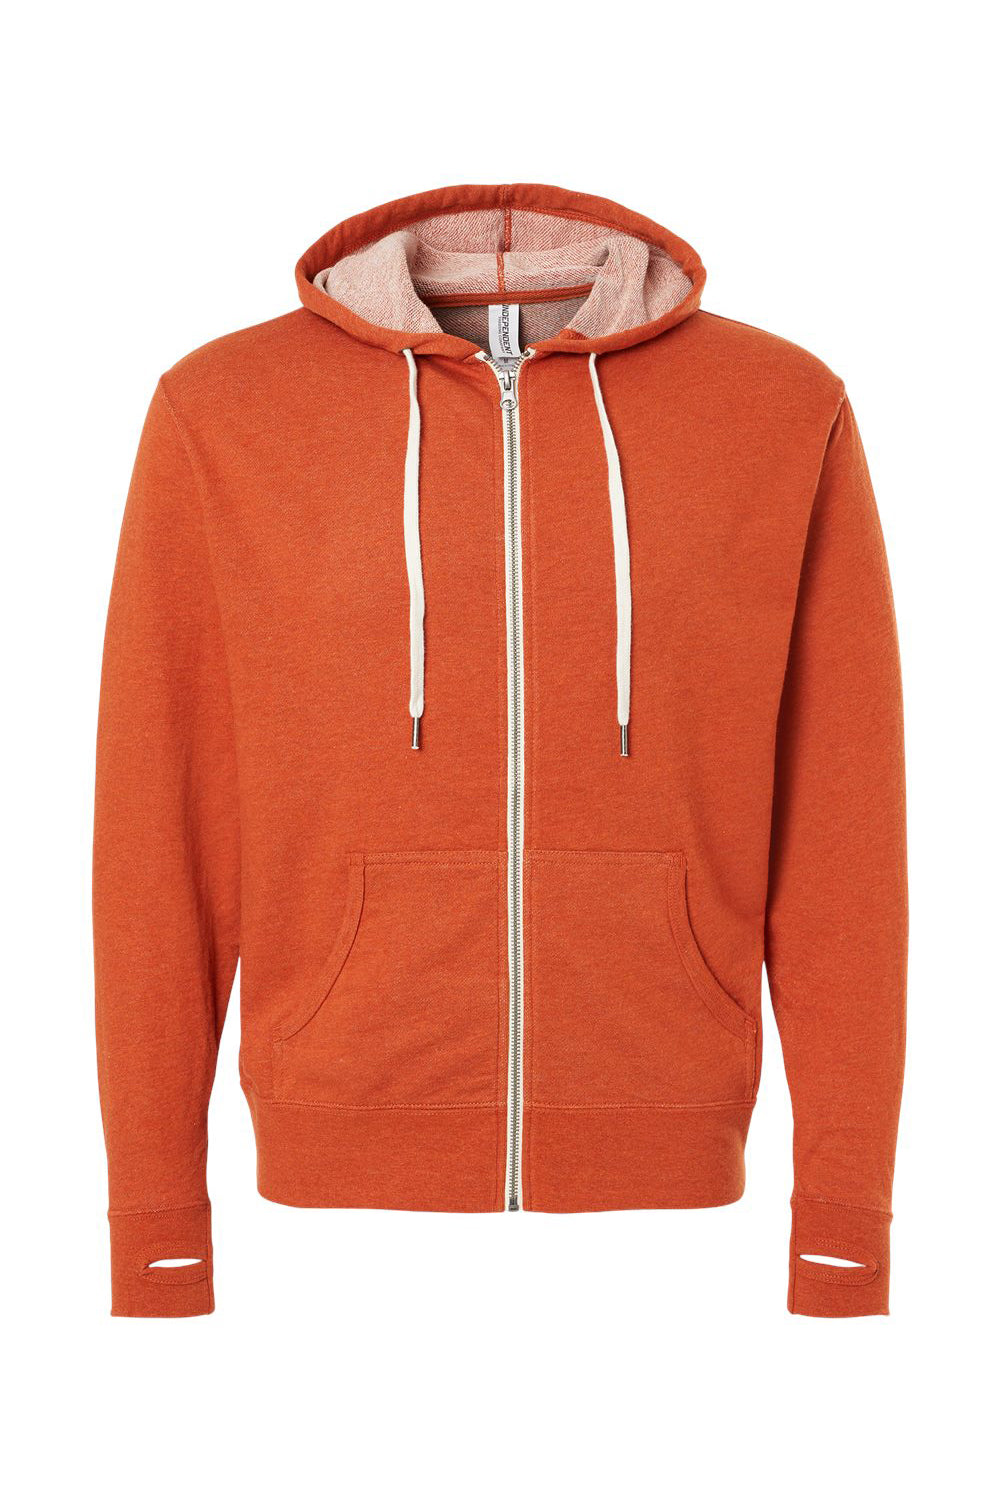 Independent Trading Co. PRM90HTZ Mens French Terry Full Zip Hooded Sweatshirt Hoodie Heather Burnt Orange Flat Front